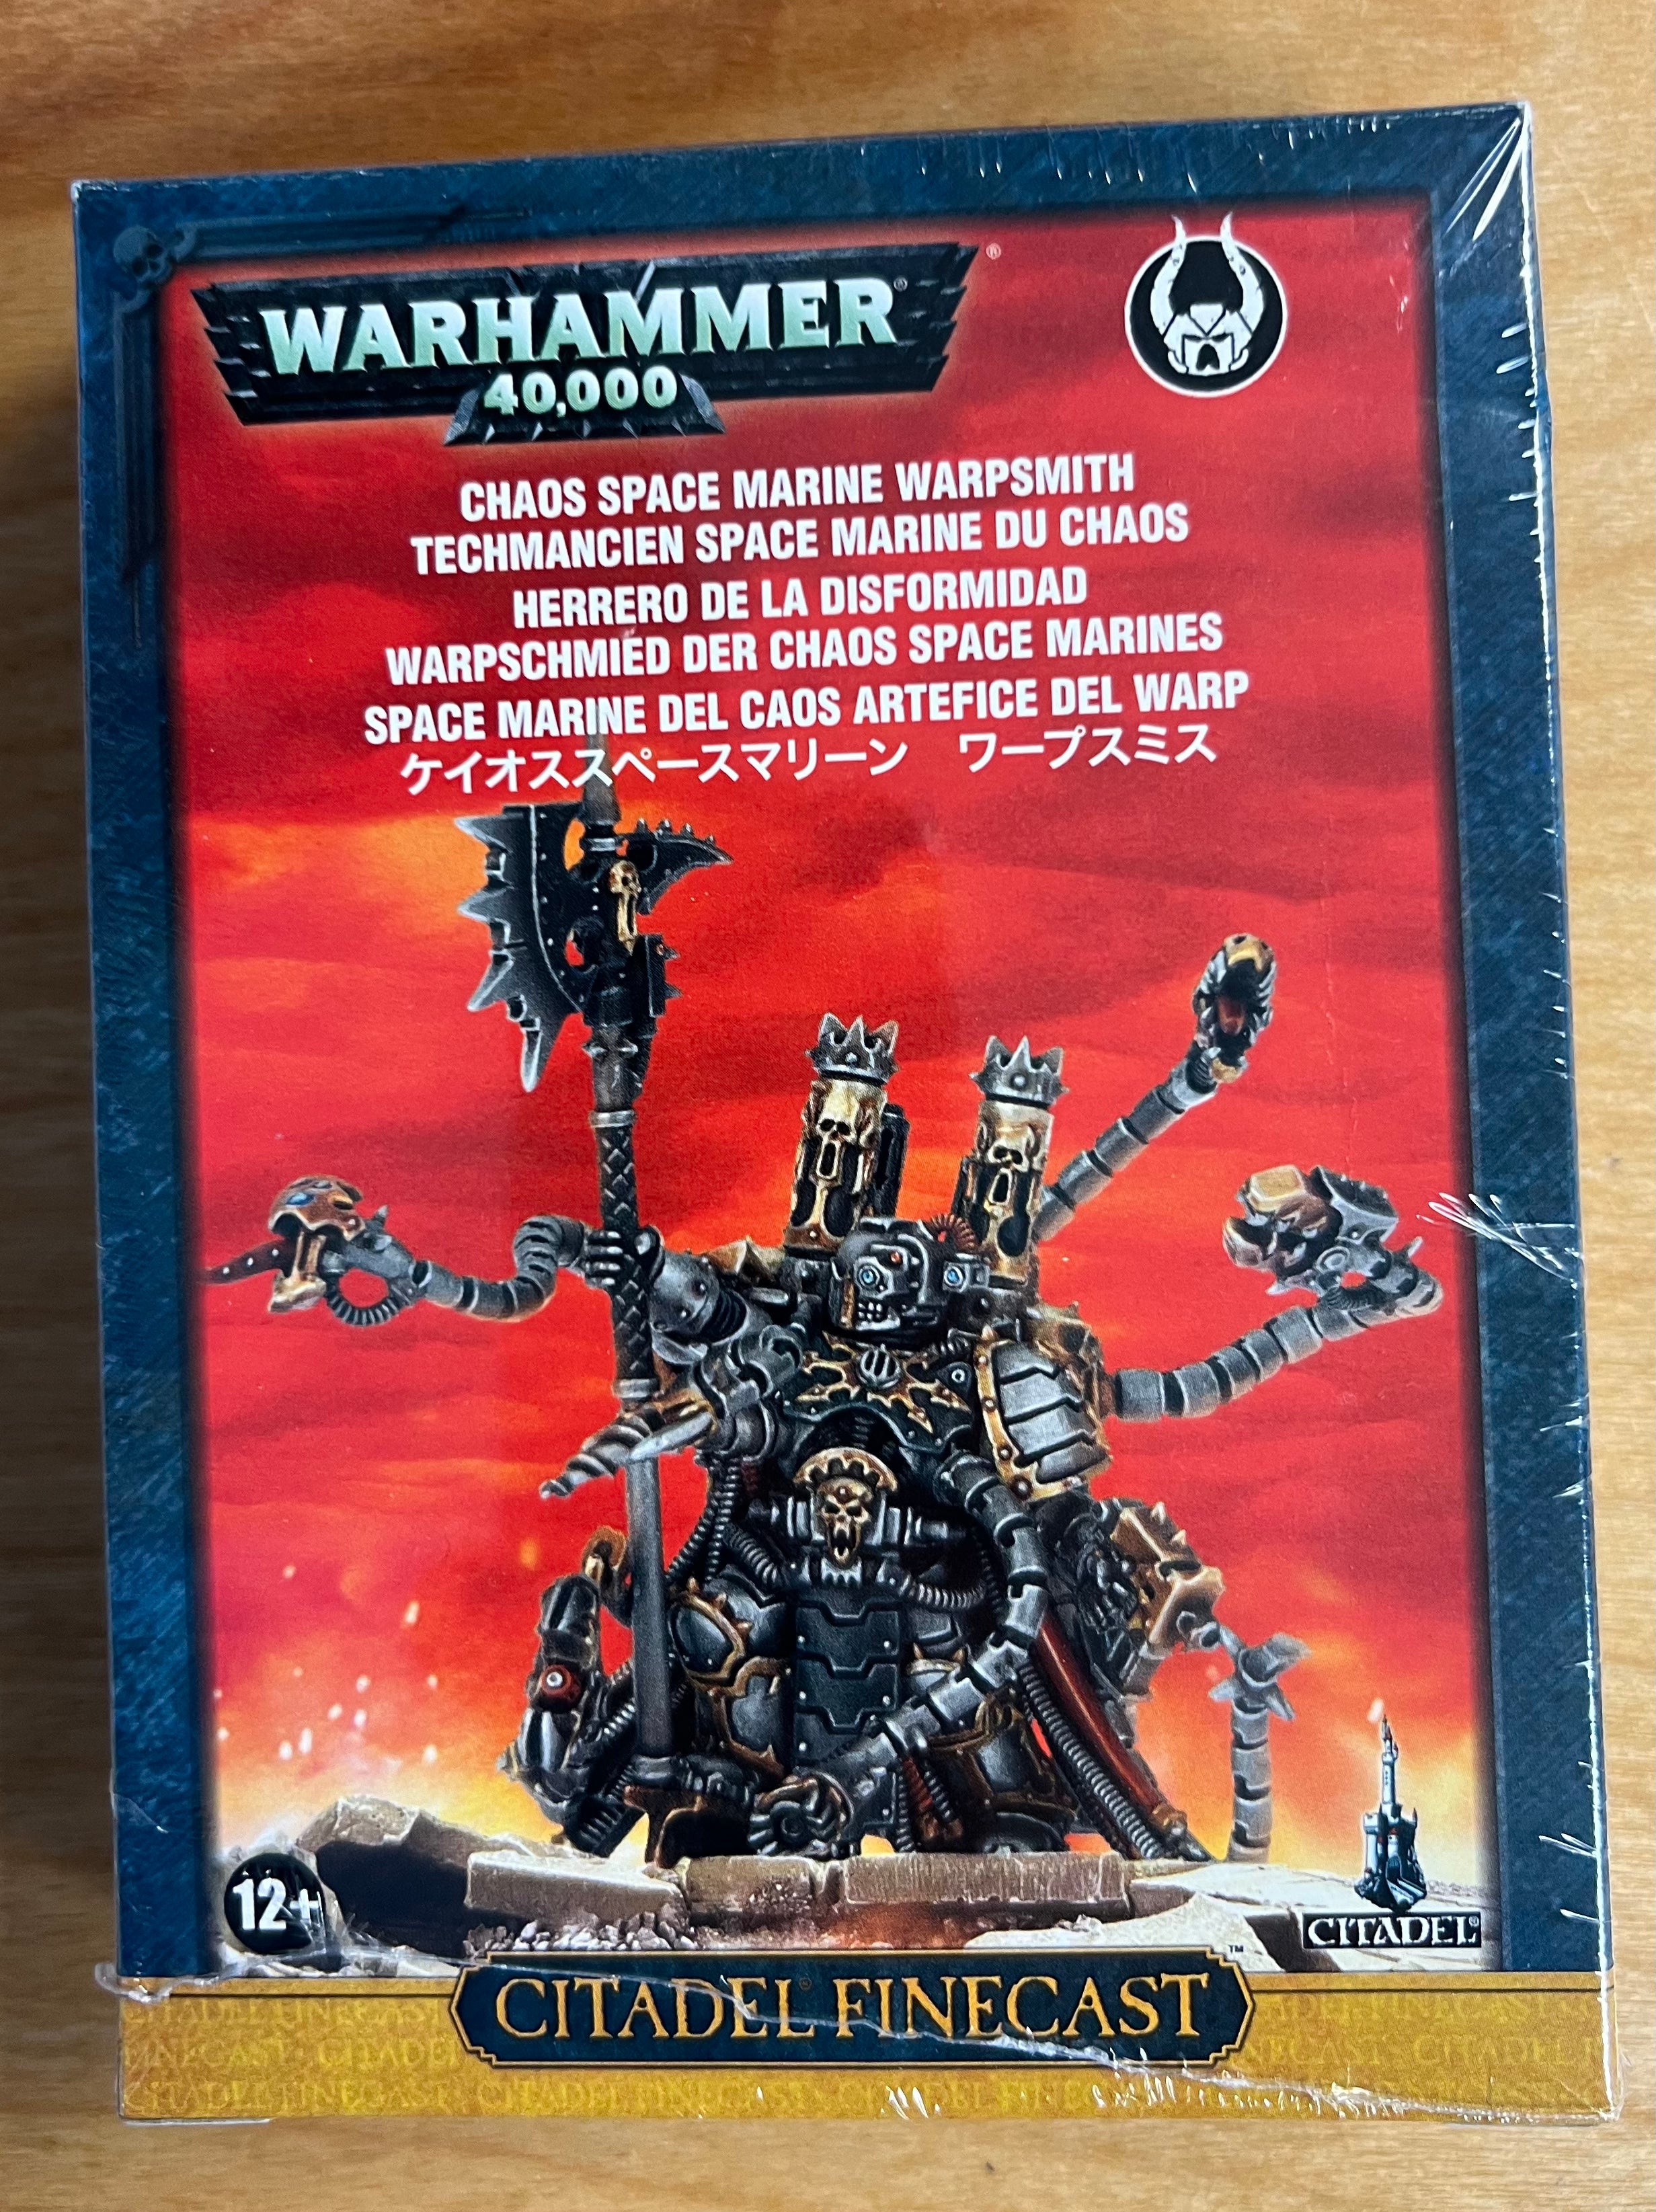 Chaos Space Marine Warpsmith (Old Box, Finecast, OOP)